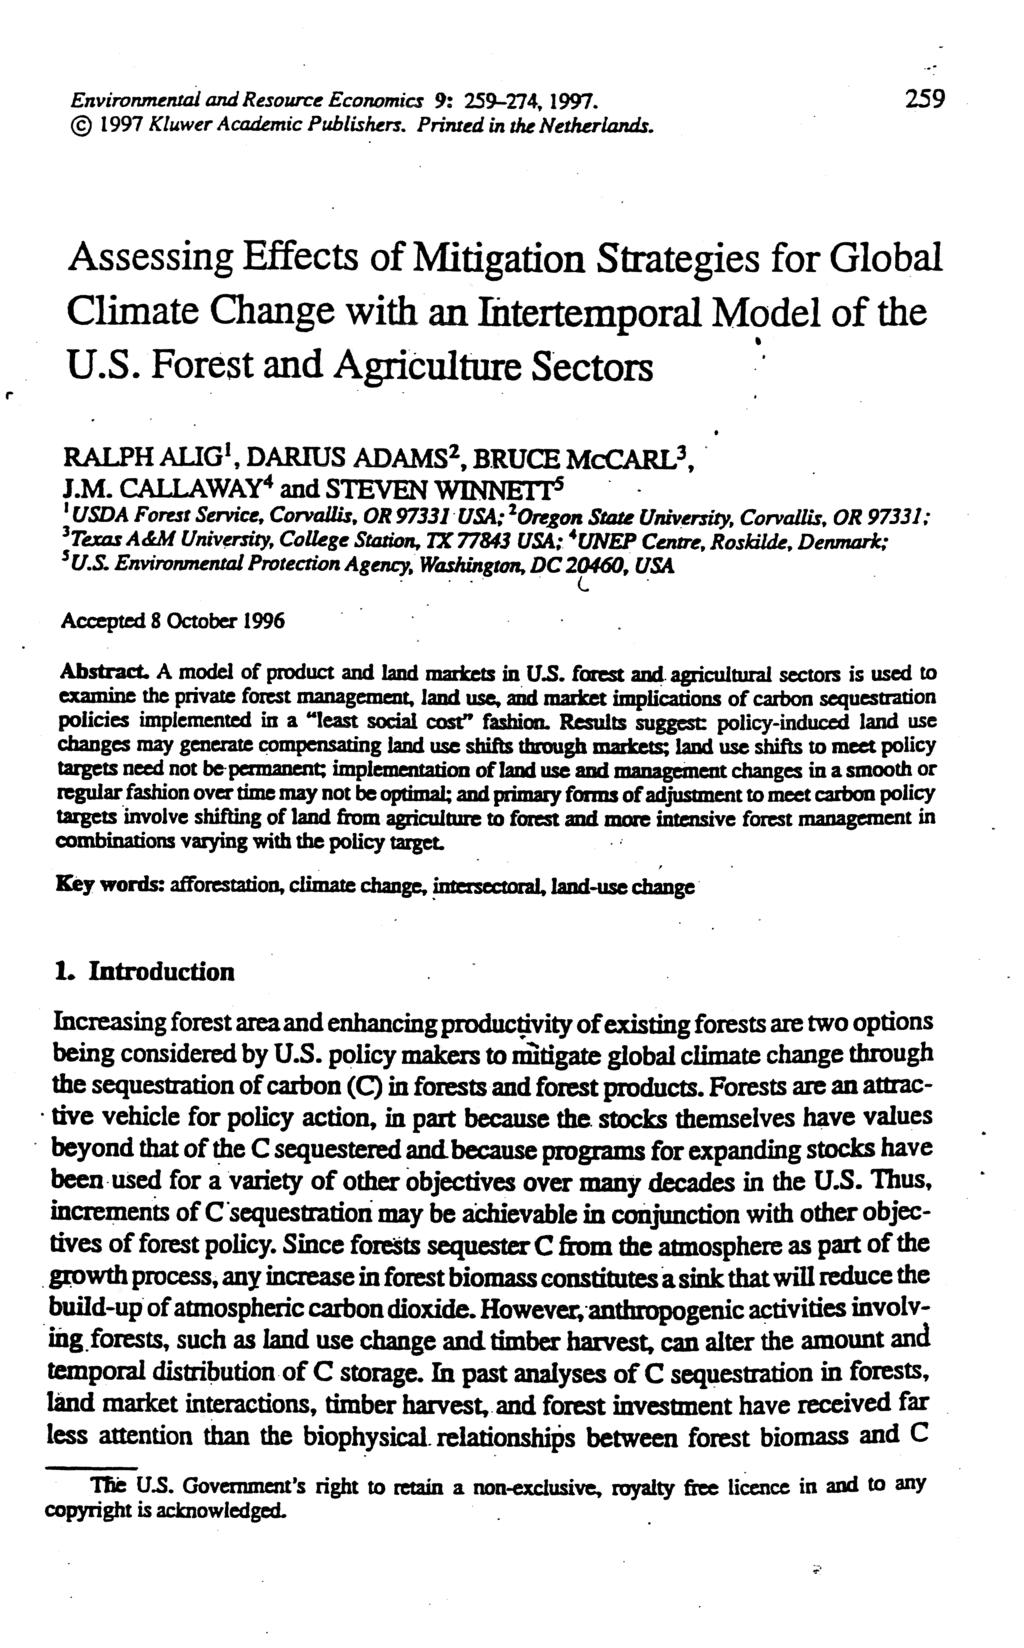 Assessing cts of Mitigation Strategies for Global ate Change with an Intertemporal Model of the b U.S. Forest and AMeulture Sectors RALPH ALIC~, J.M. WAY^ and STEVEN 1 USDA Fumr Sm*ctt OR 97331 US& 'Orrgon State (Iee-, Cow&t OR 97331; unive.